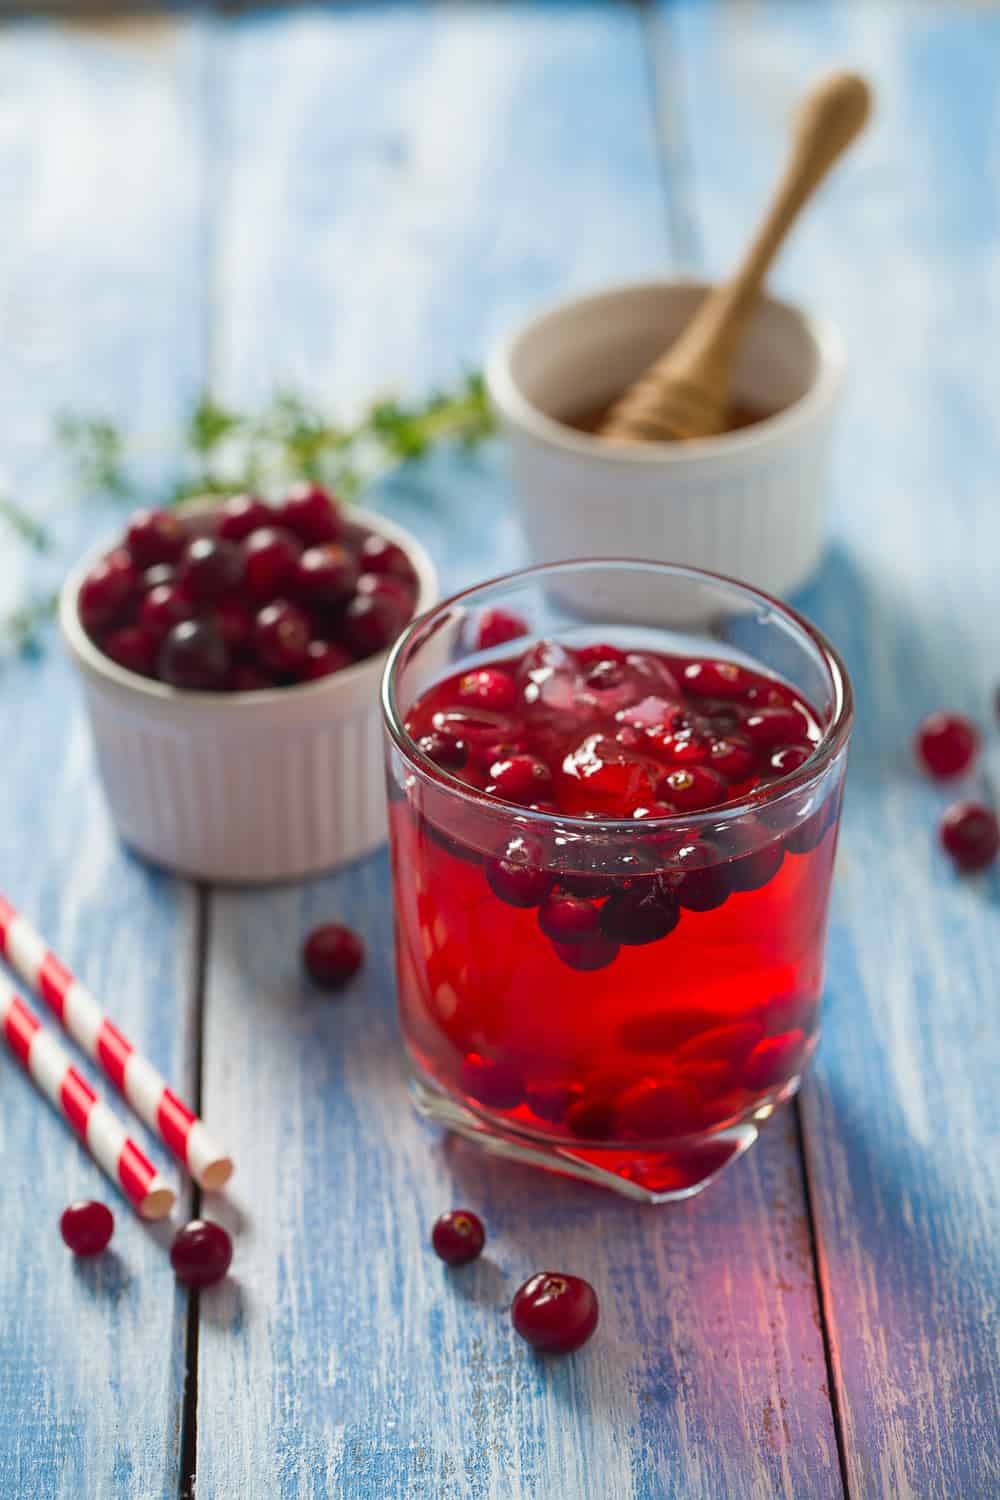 Does Cranberry Juice go bad